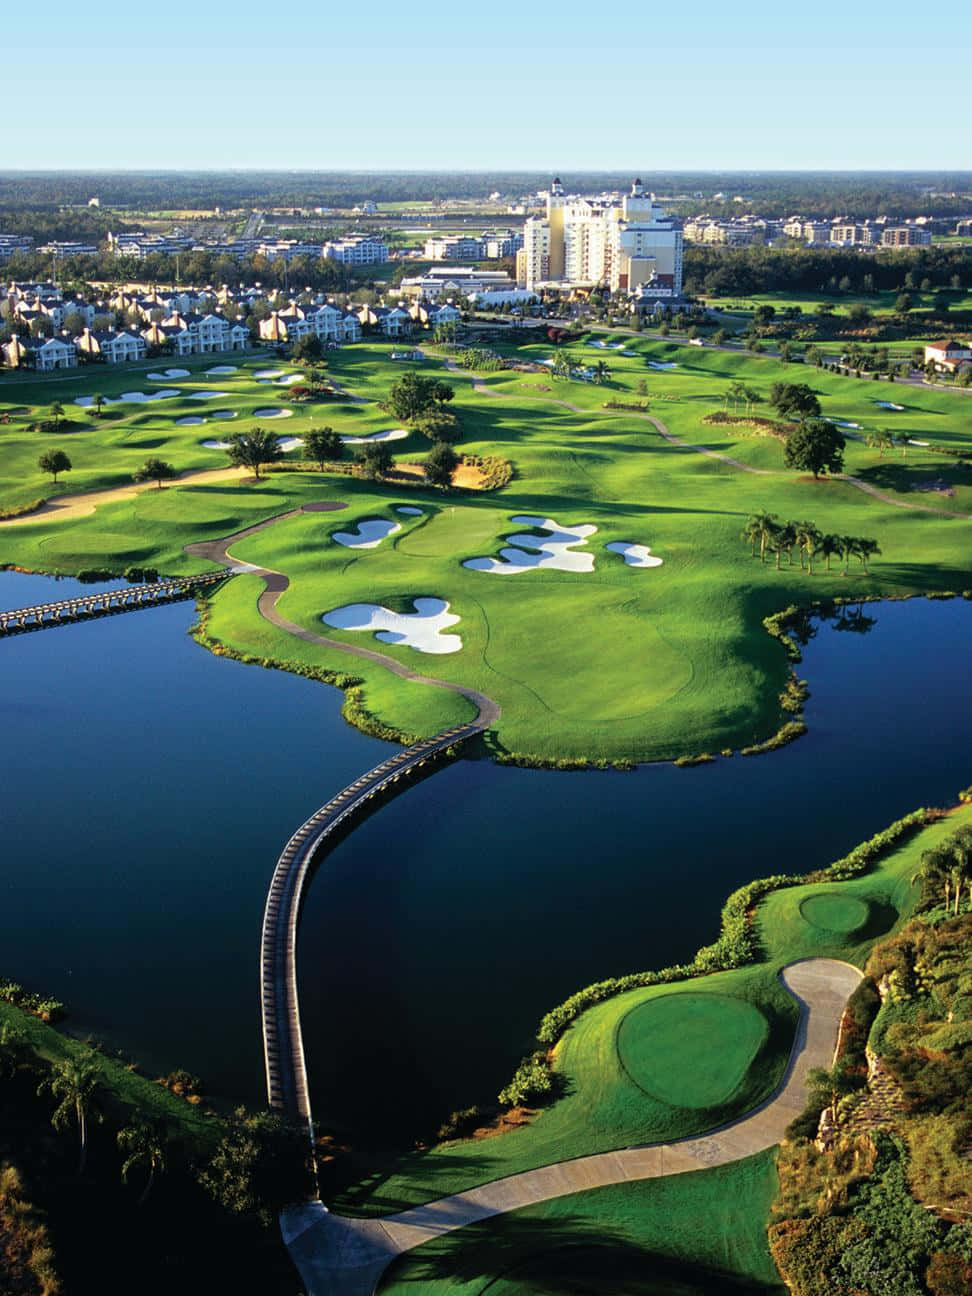 Enjoy the tranquil beauty of a golf course